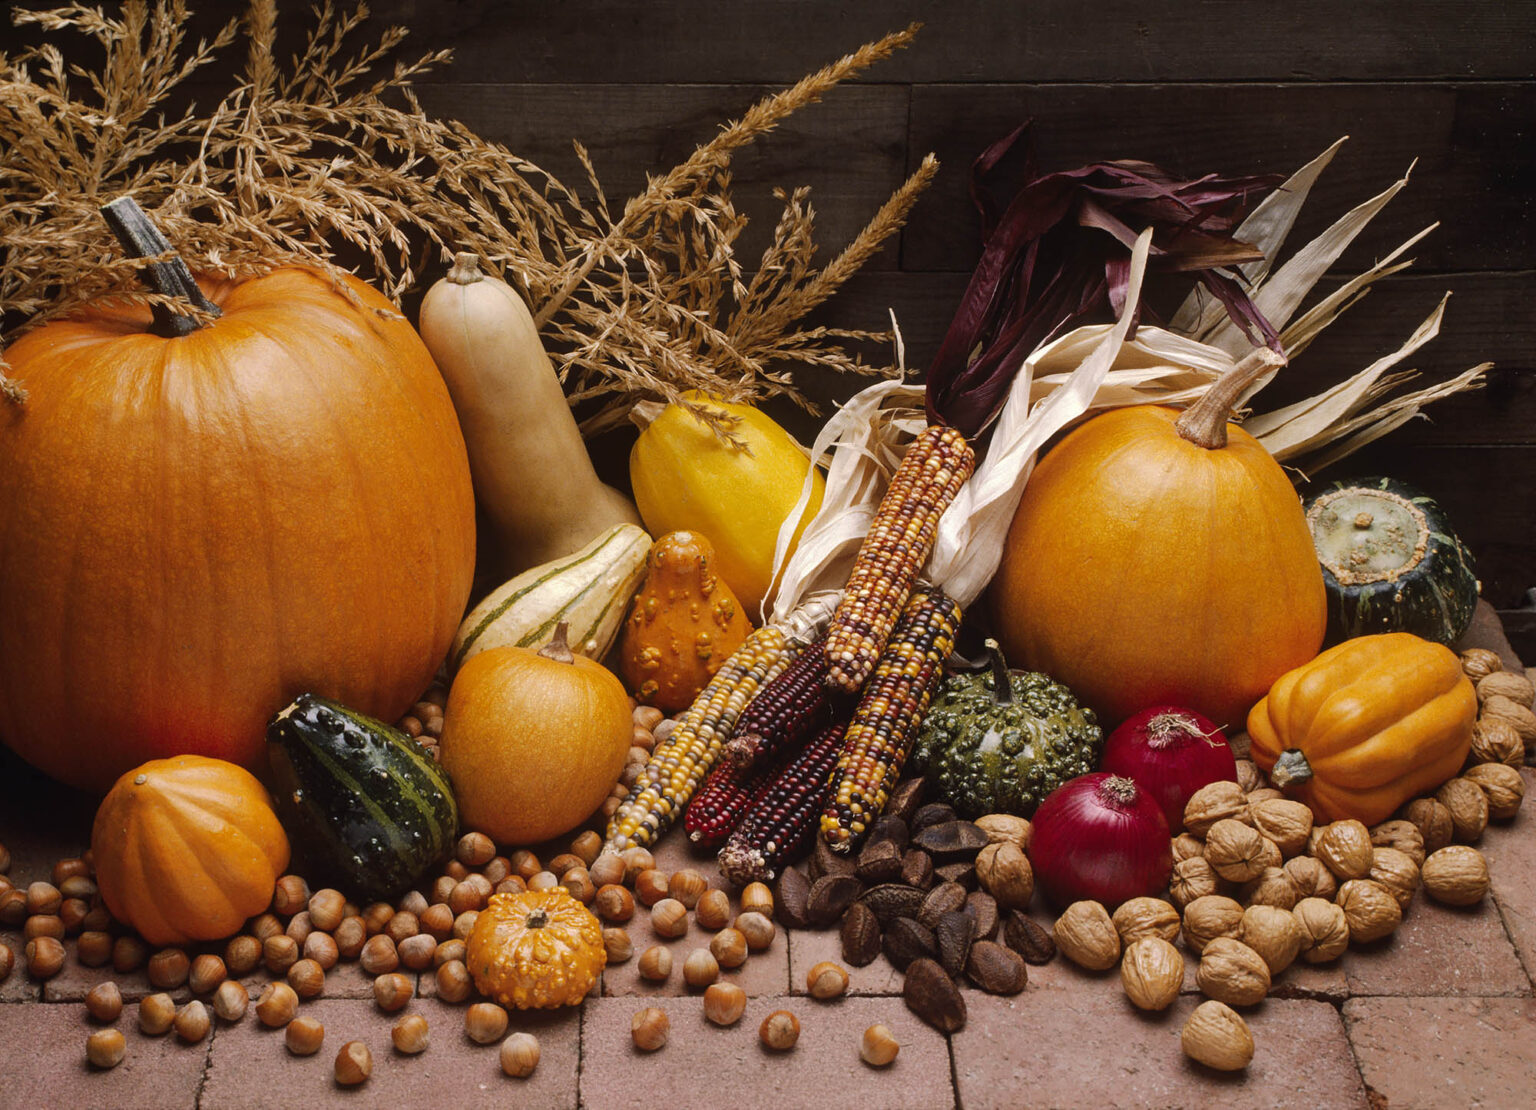 Fall harvest of PUMPKINS, GOURDS, ONIONS, SQUASH, INDIAN CORN & mixed NUTS